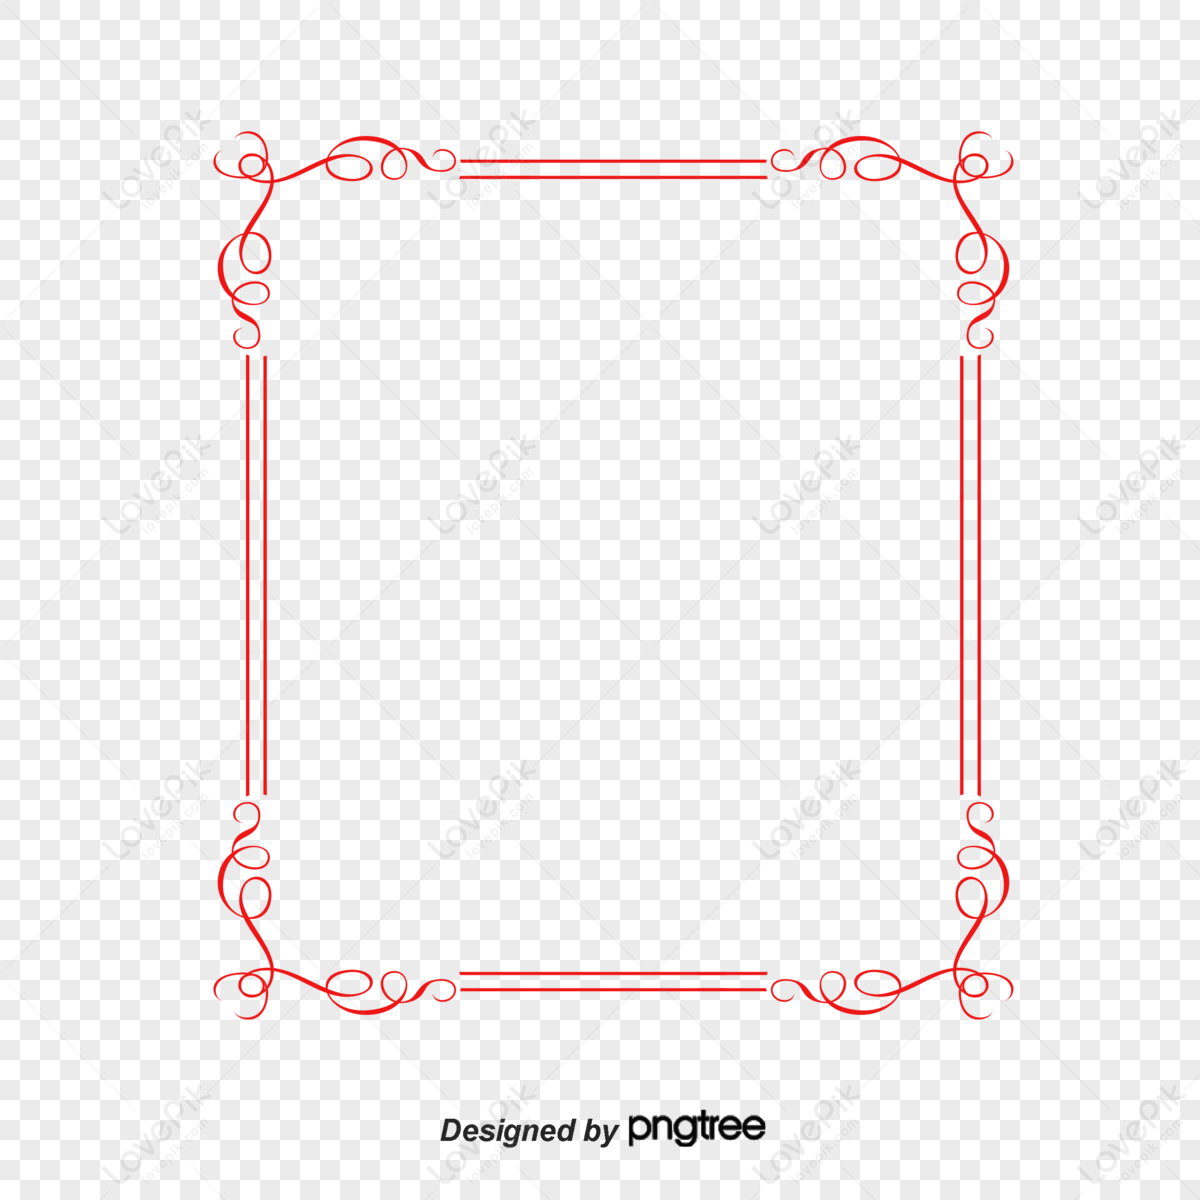 Red Line PNG Transparent For Free Download - PngFind